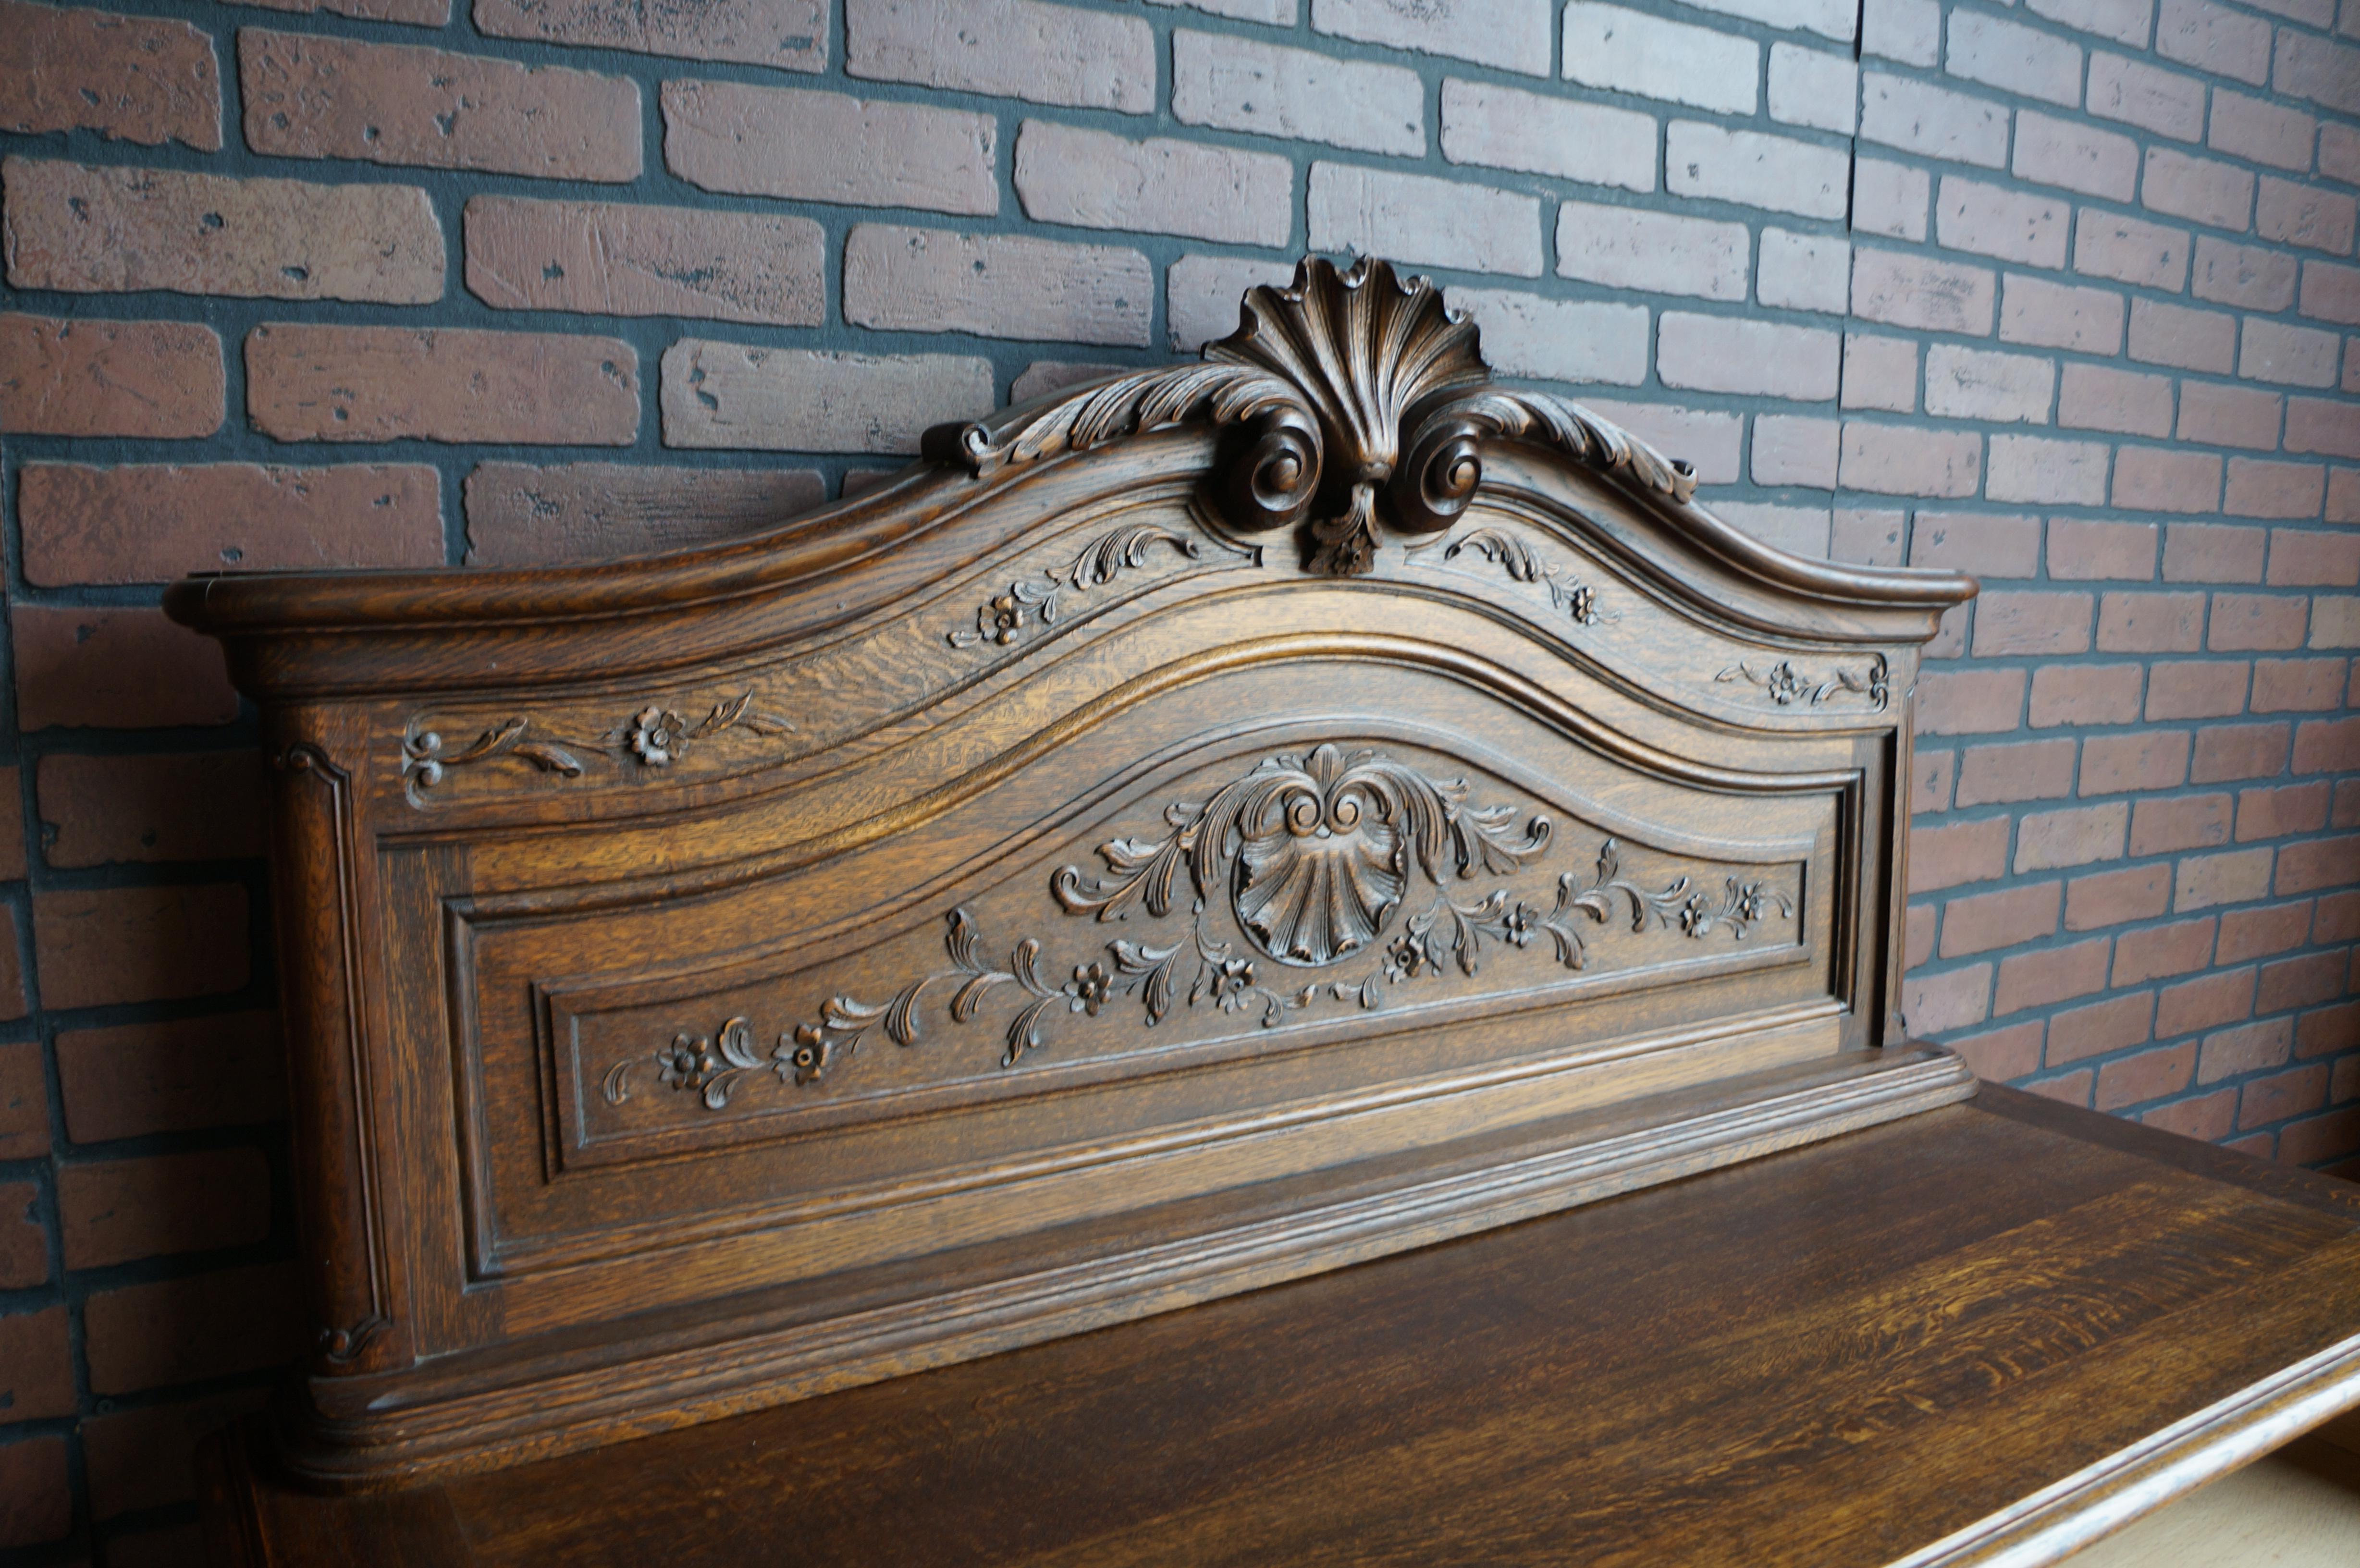 Remarkable French Country Oak Buffet. Exceptional carved details showcase fine craftsmanship. Featuring curvaceous raised door panels, scalloped apron and sweet cabriole legs. Love the back splash with shell pediment that is repeated in the shell